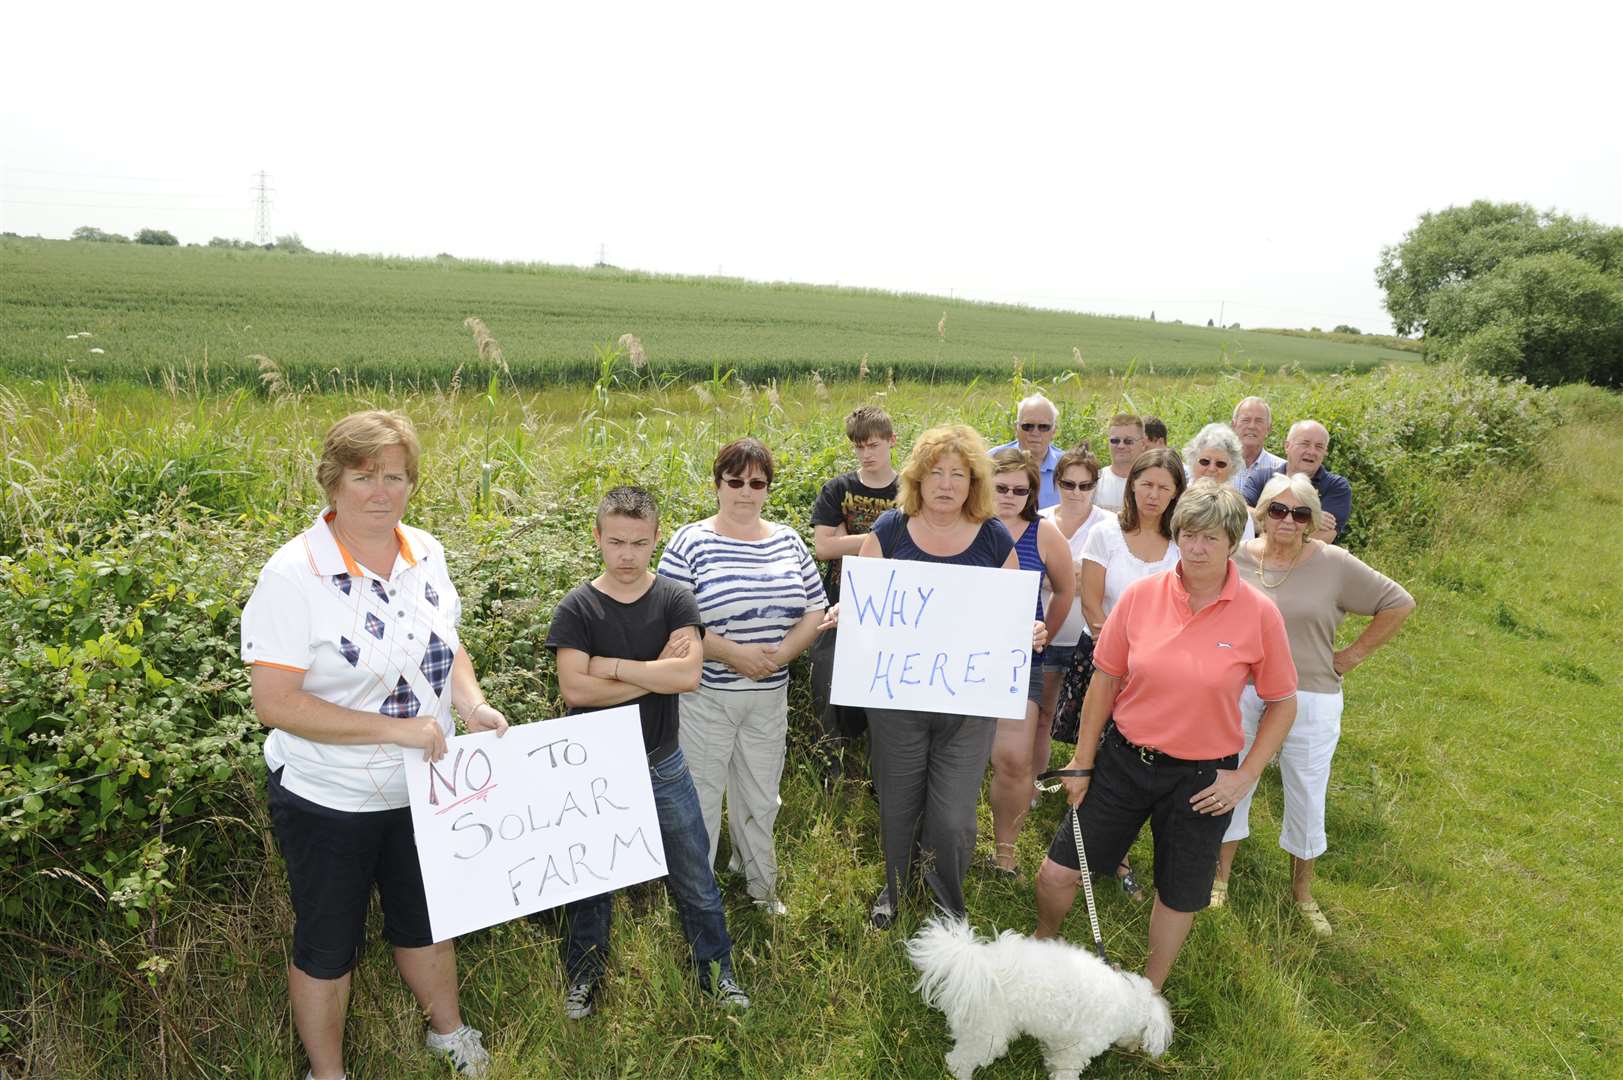 Campaigners against the previous application for a solar farm could rally round again